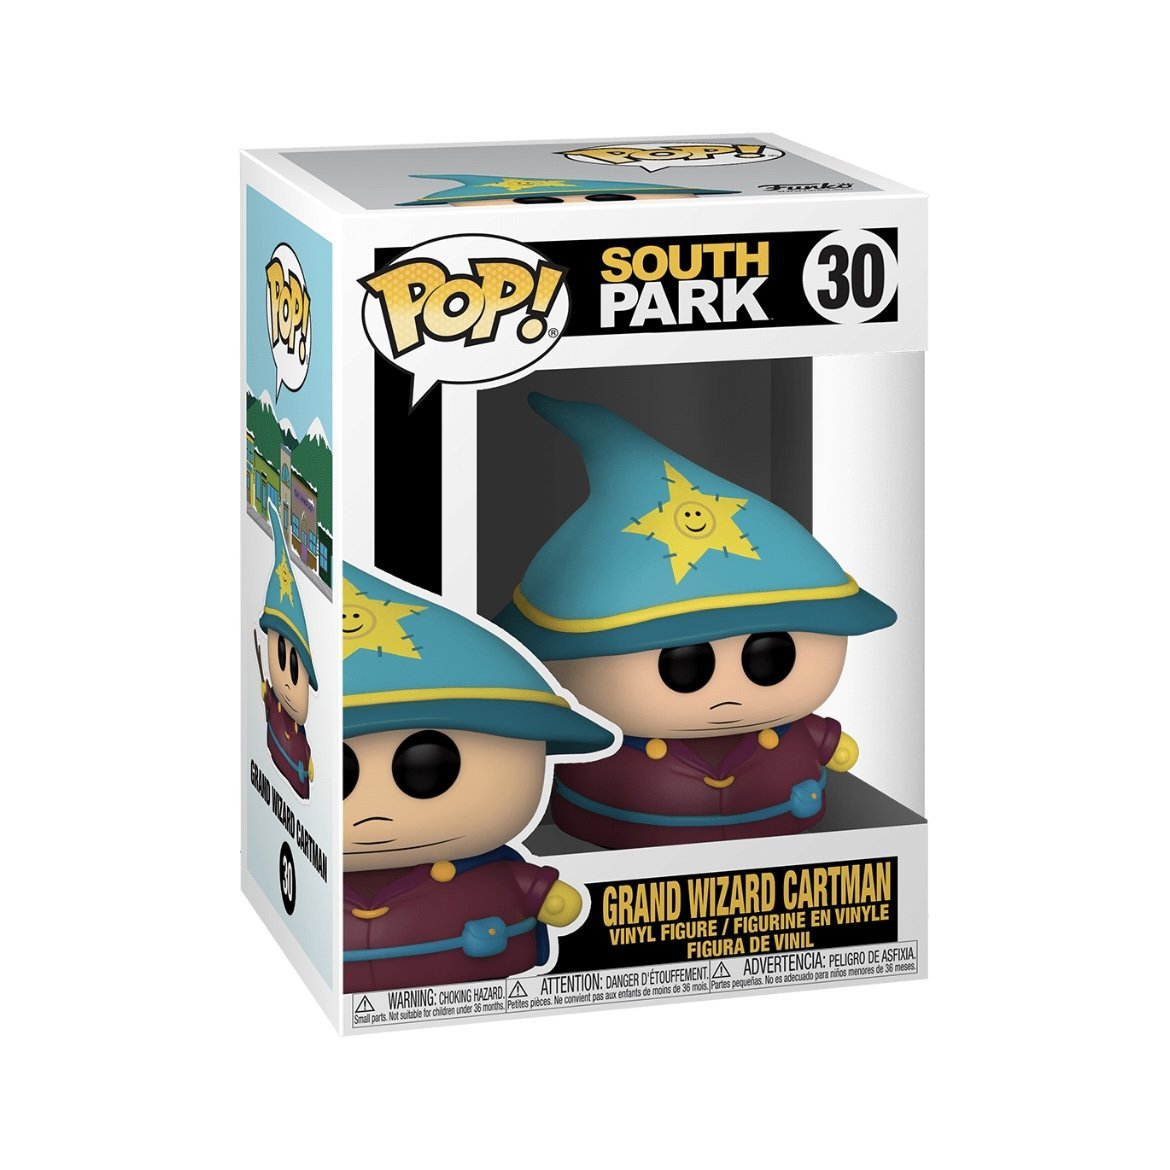 Grand Wizard Cartman #30 Funko Pop! South Park - Angry Cat